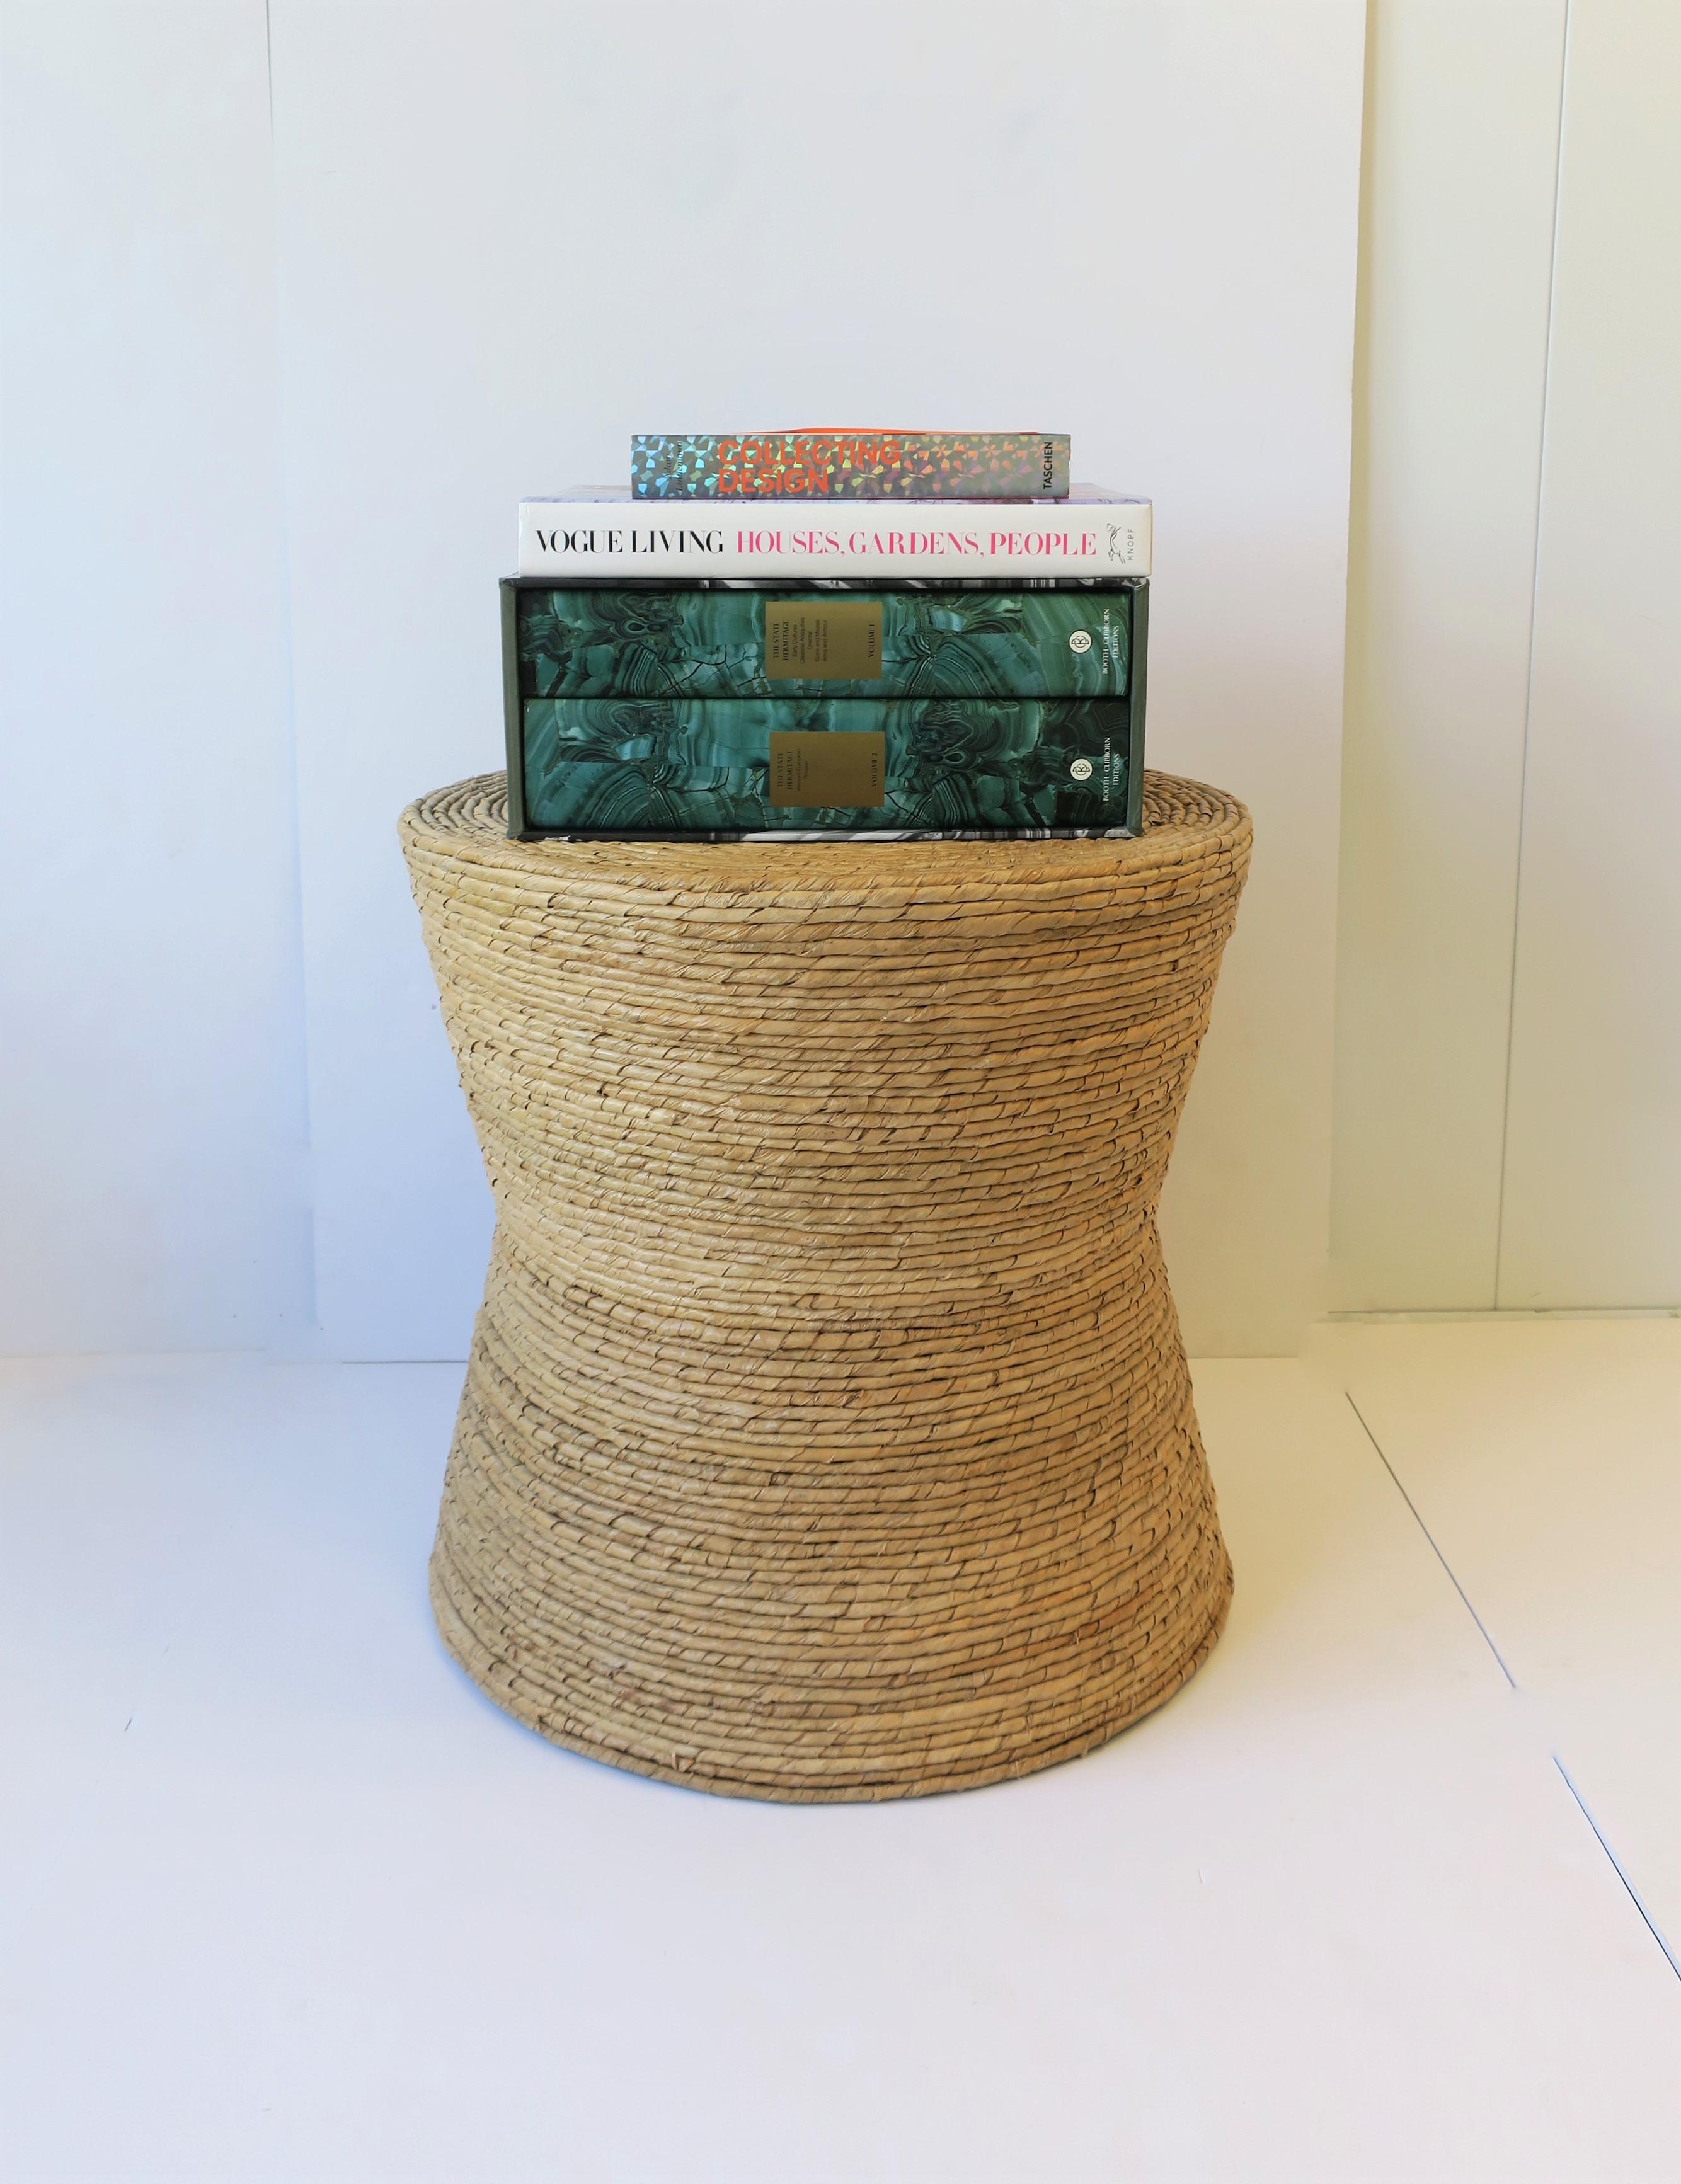 Paper Hermitage Museum Coffee Table or Library Books with Malachite Green Dust Jackets